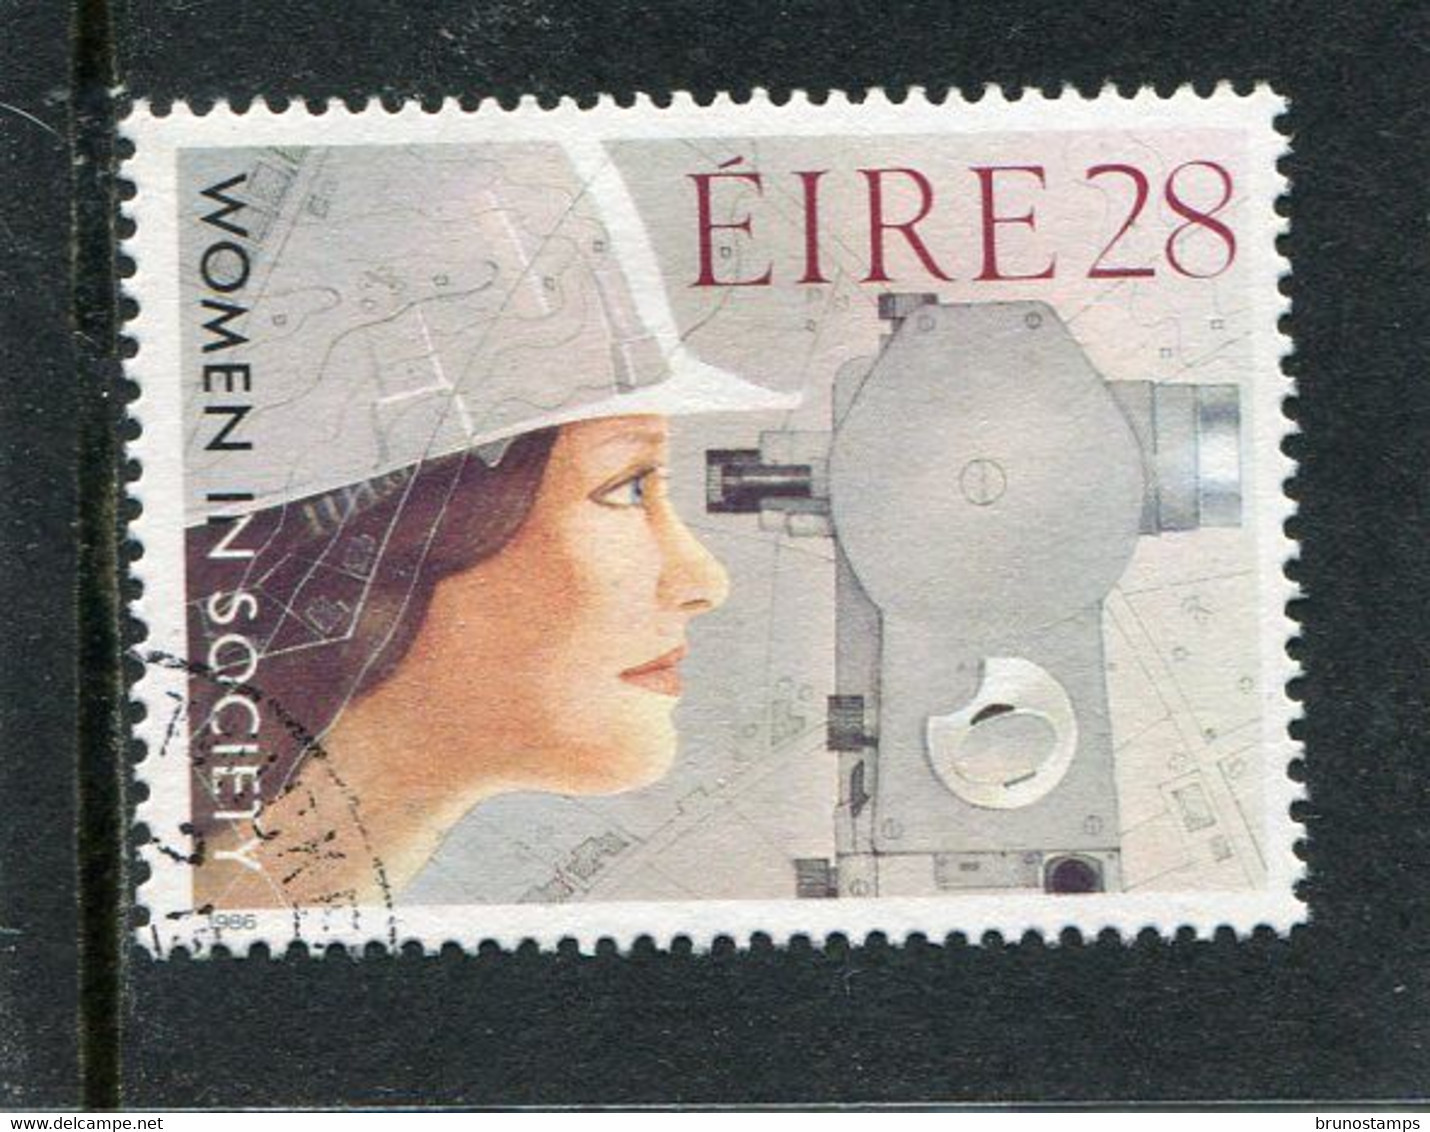 IRELAND/EIRE - 1986  28p  WOMEN IN SOCIETY  FINE USED - Used Stamps